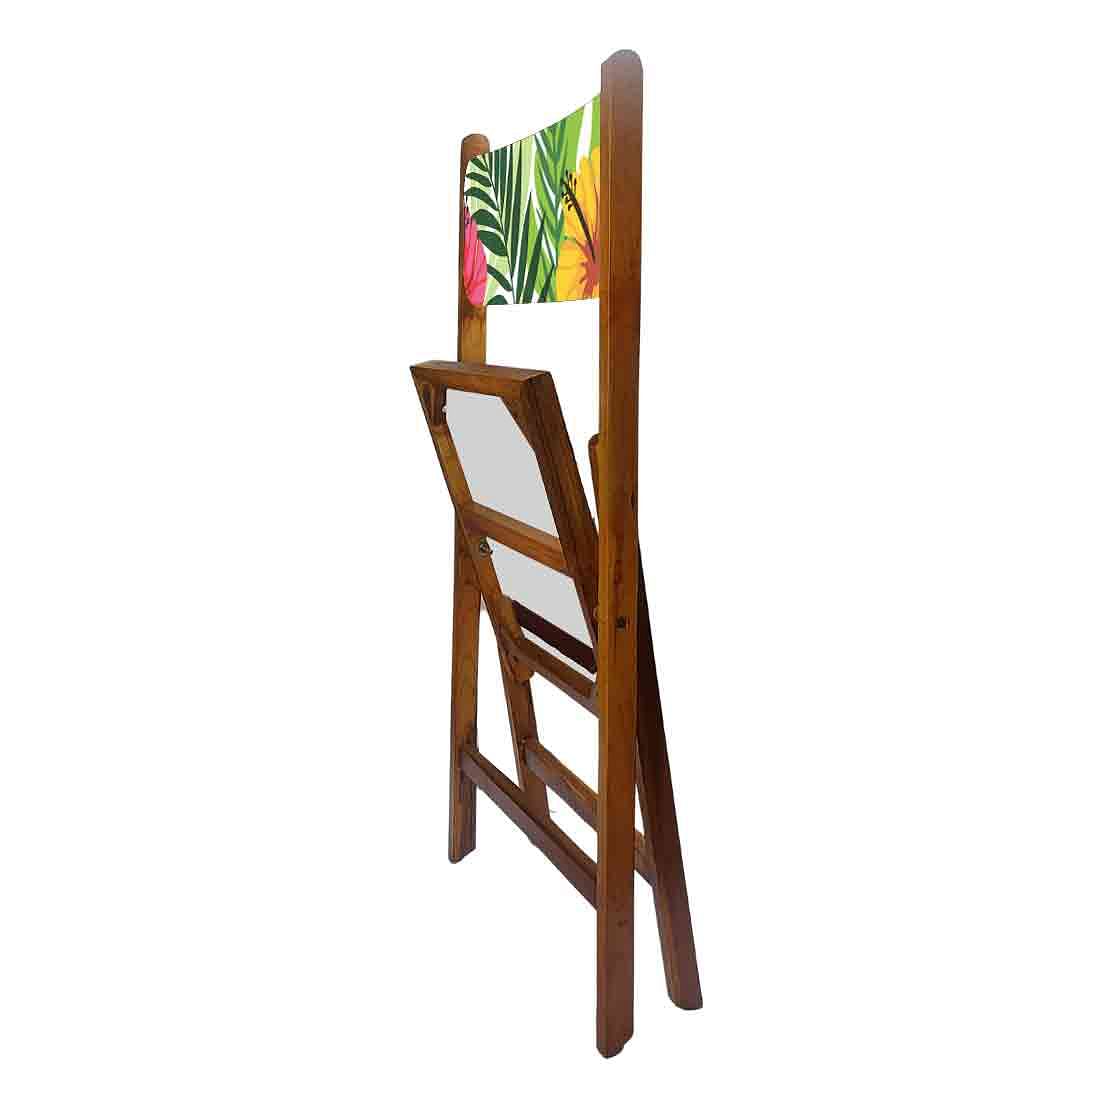 Nutcase Folding Chair For Home Dining - Yellow Hibiscus Nutcase